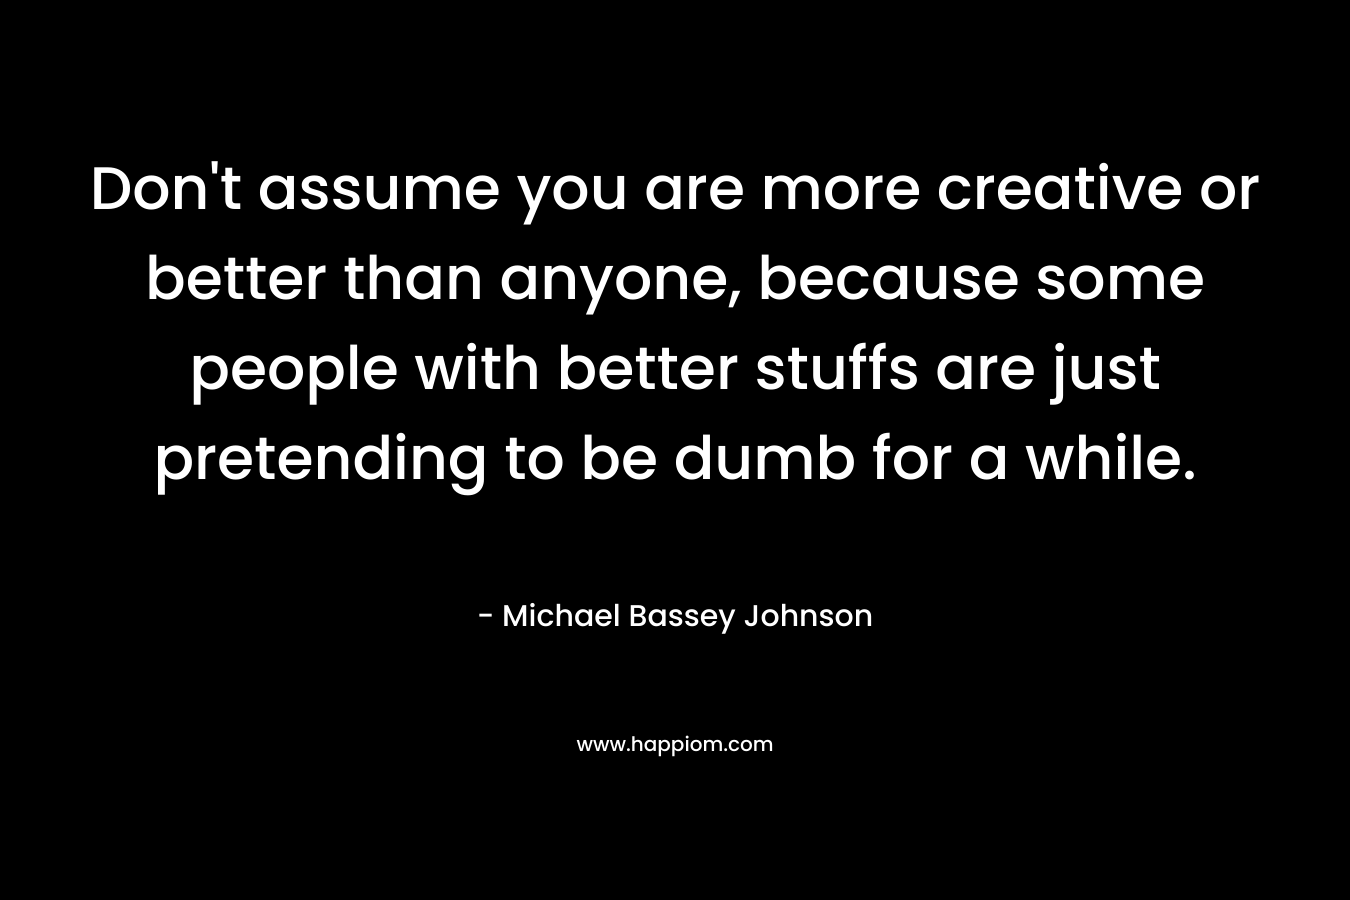 Don’t assume you are more creative or better than anyone, because some people with better stuffs are just pretending to be dumb for a while. – Michael Bassey Johnson